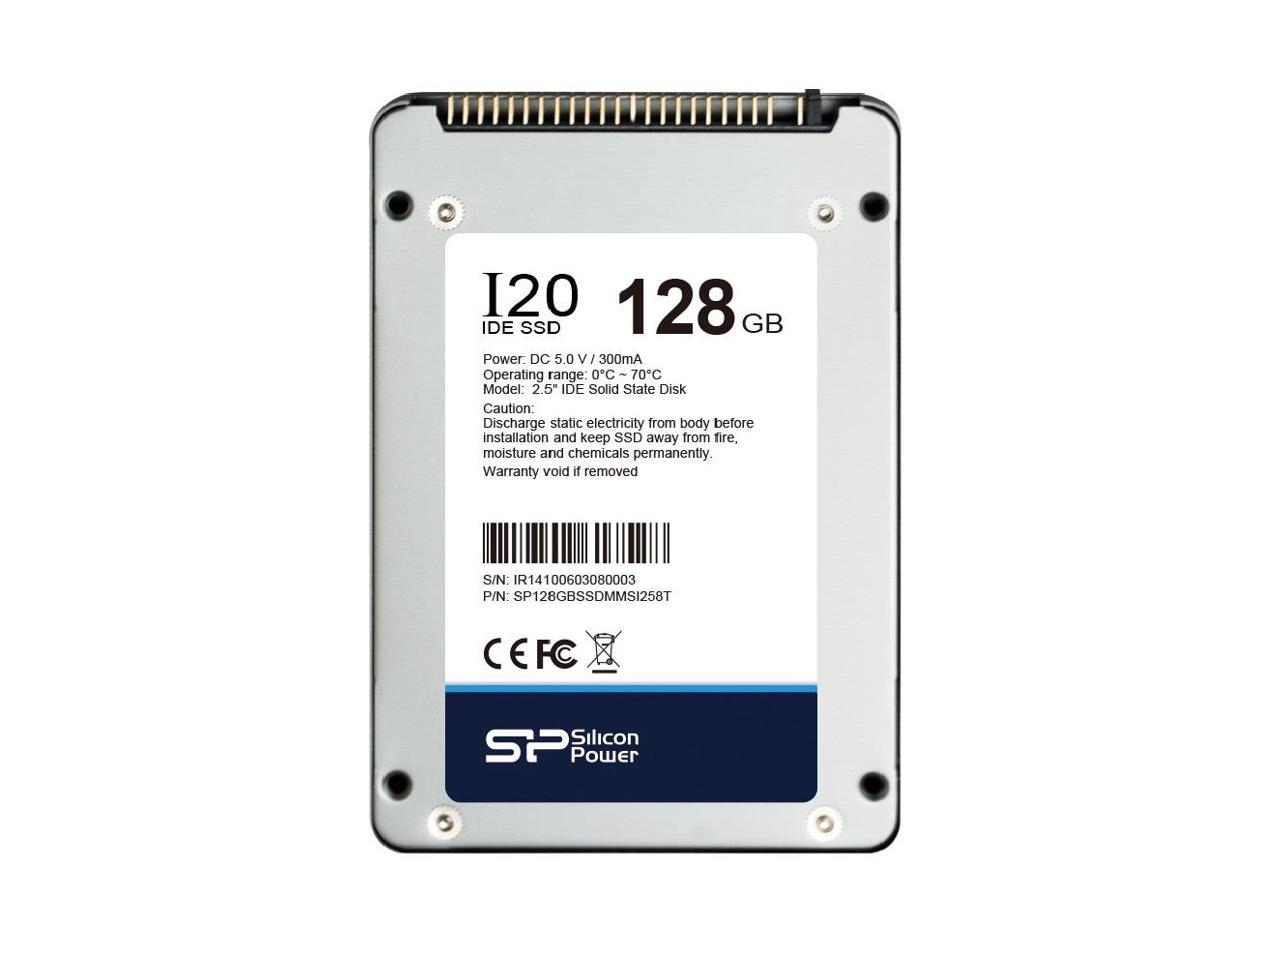 128GB Silicon Power SSD-I20 2.5-inch IDE/PATA SSD Solid State Disk (9mm, Toshiba 19nm MLC Flash)